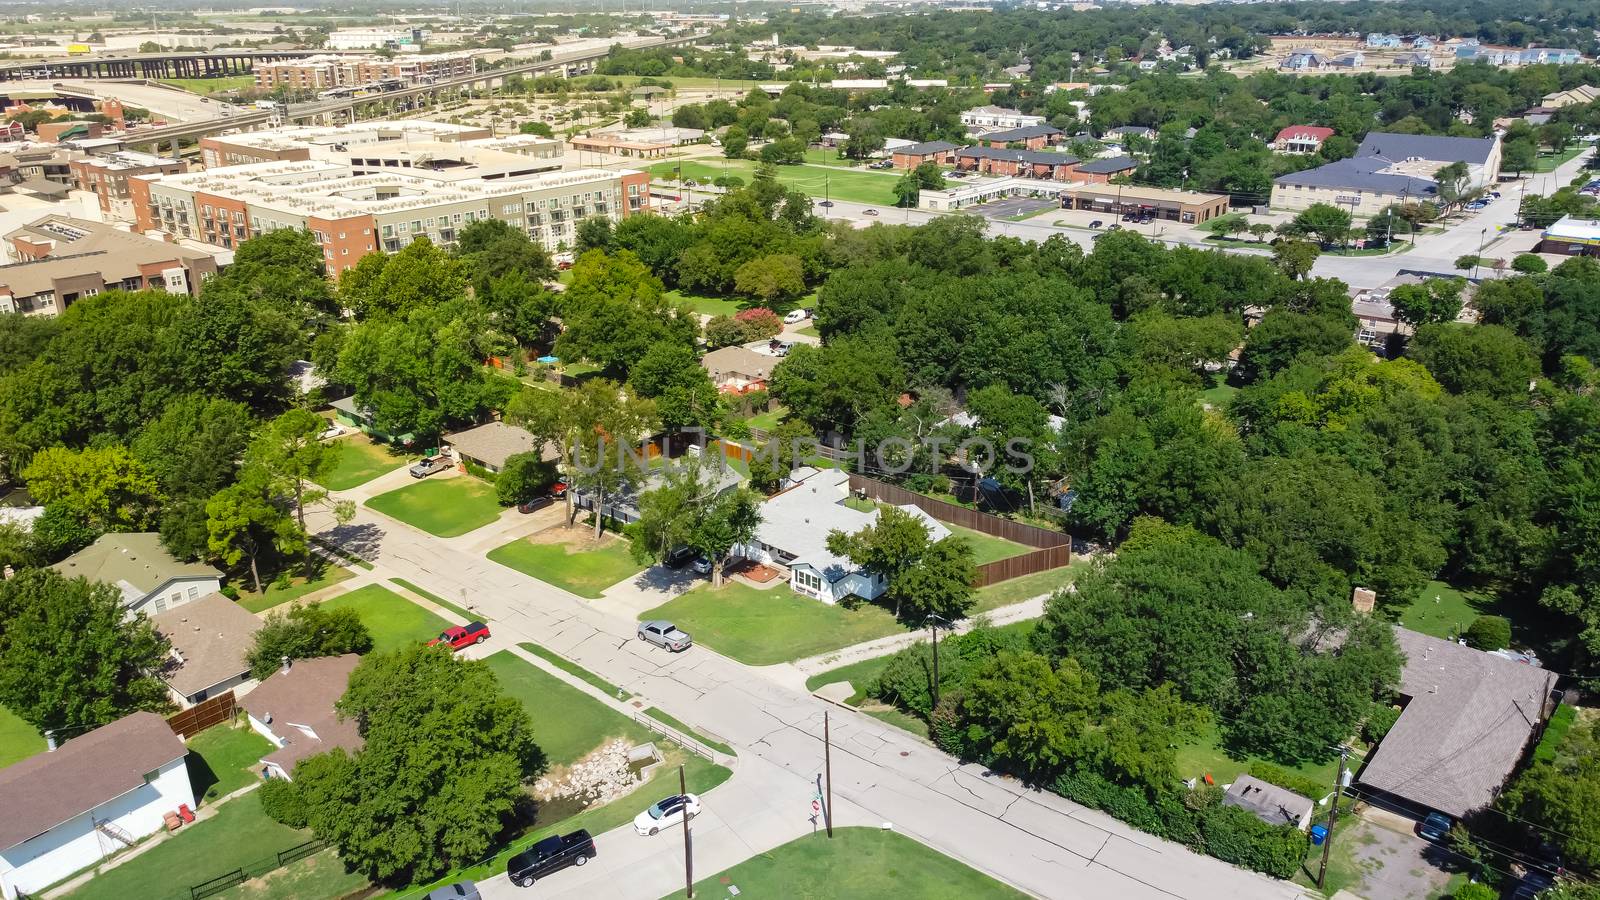 Top view green residential area outside historic downtown Carrollton, Texas by trongnguyen